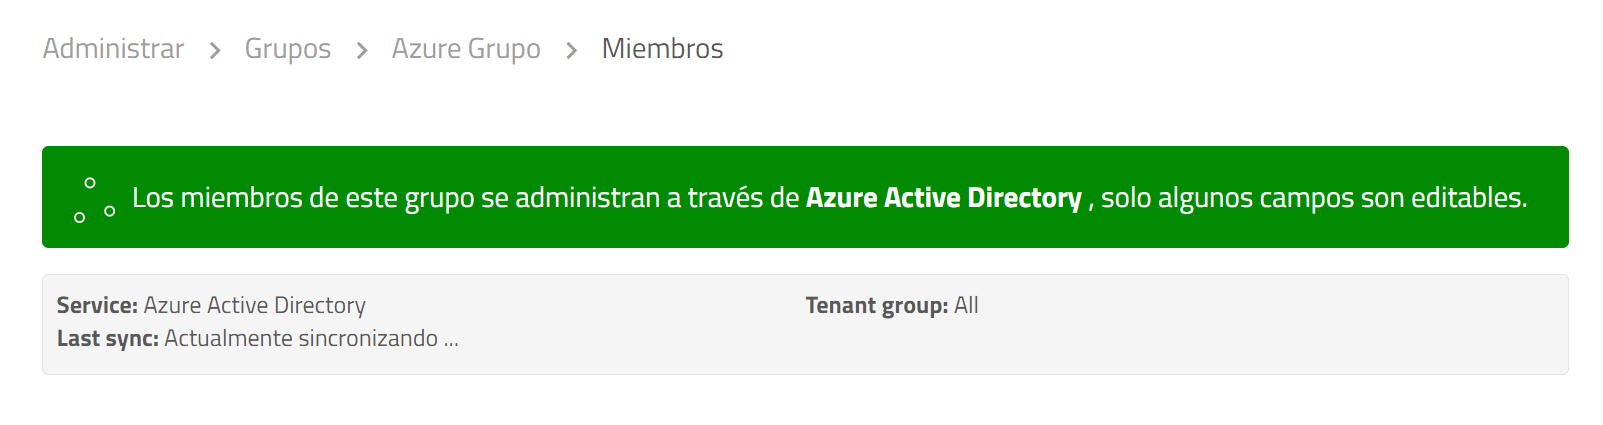 Azure AD group sync details